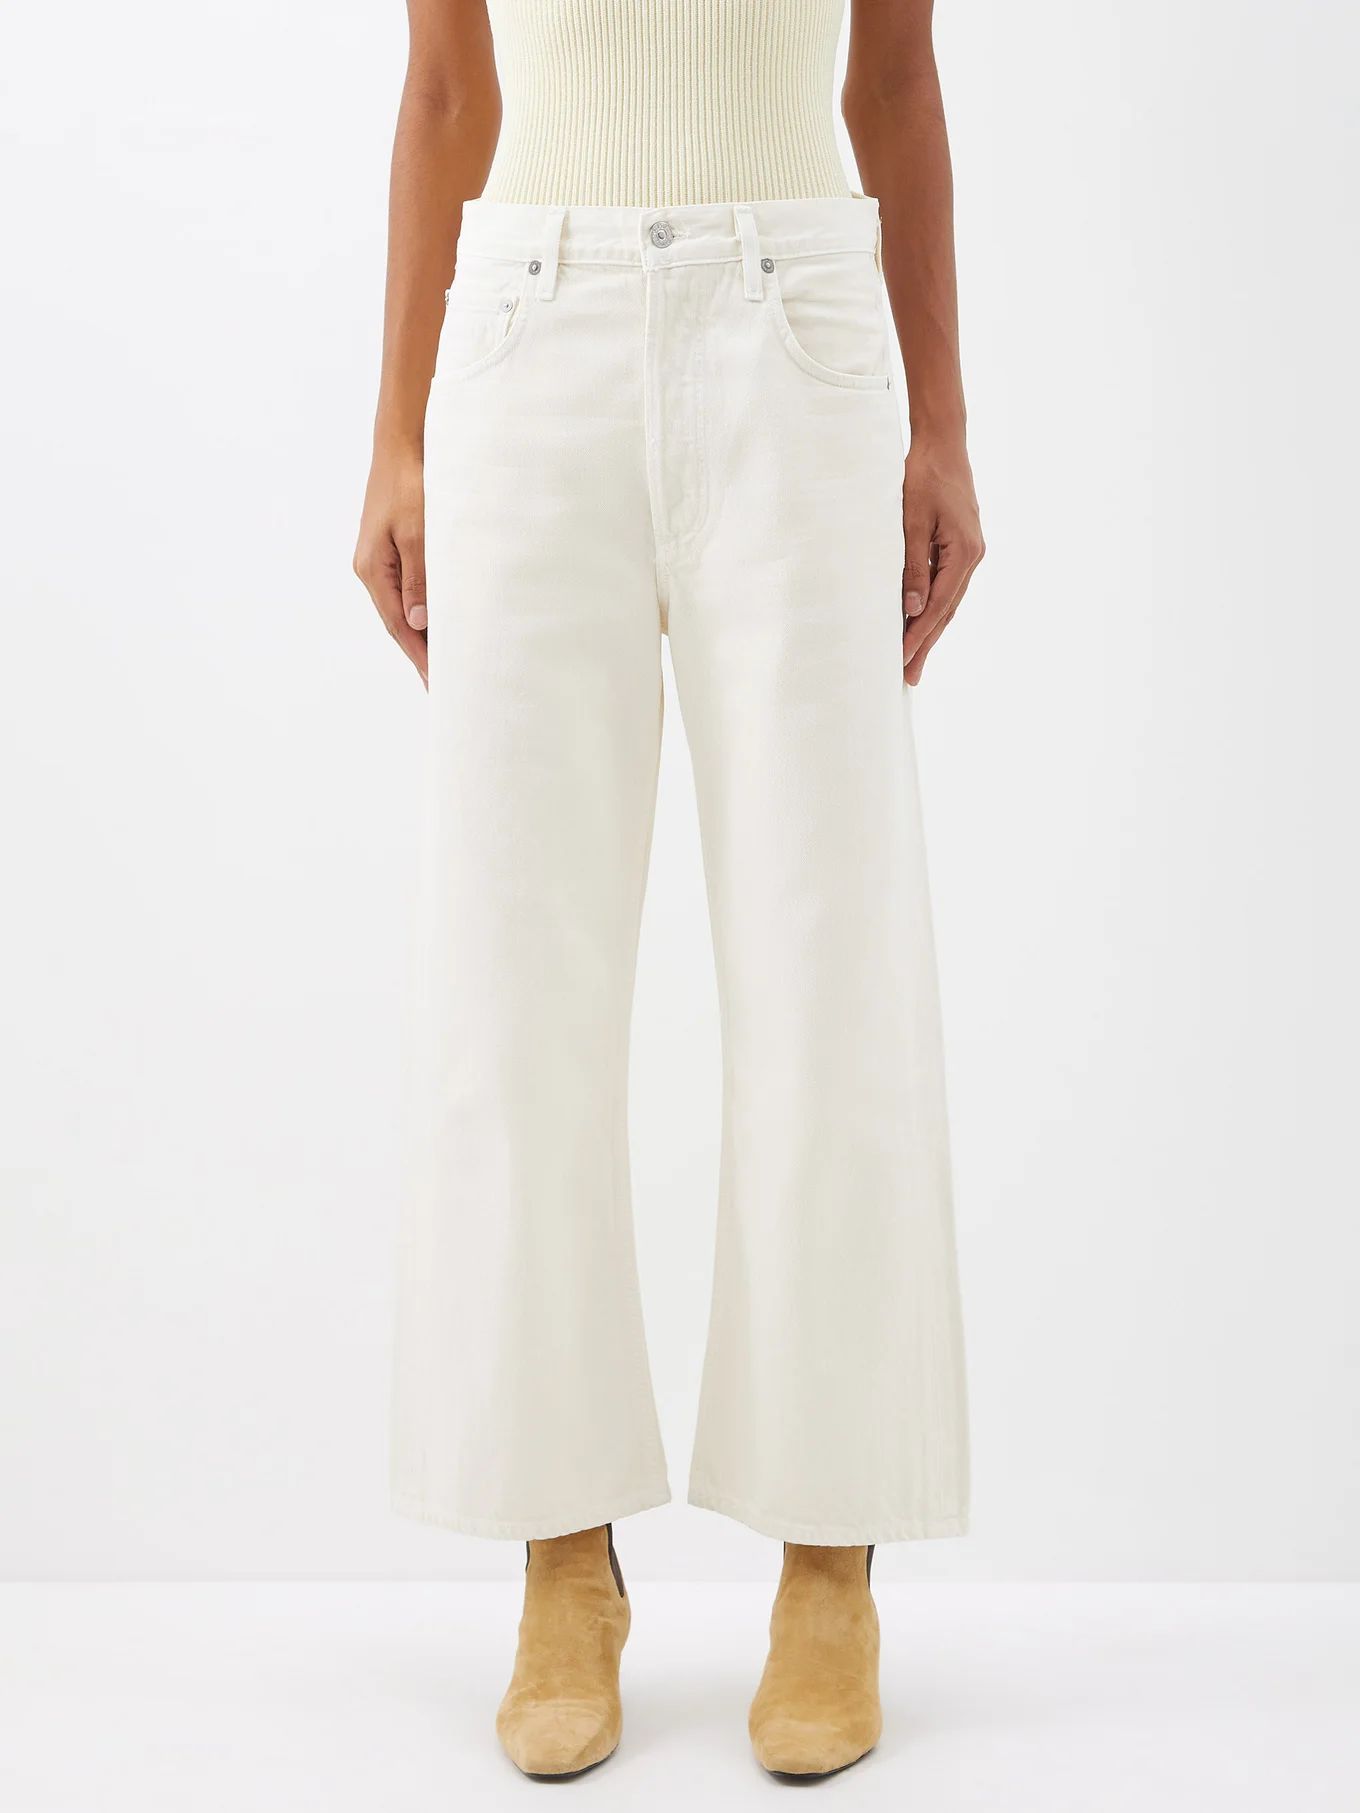 Gaucho Vintage Cropped wide-leg jeans | Citizens of Humanity | Matches (UK)